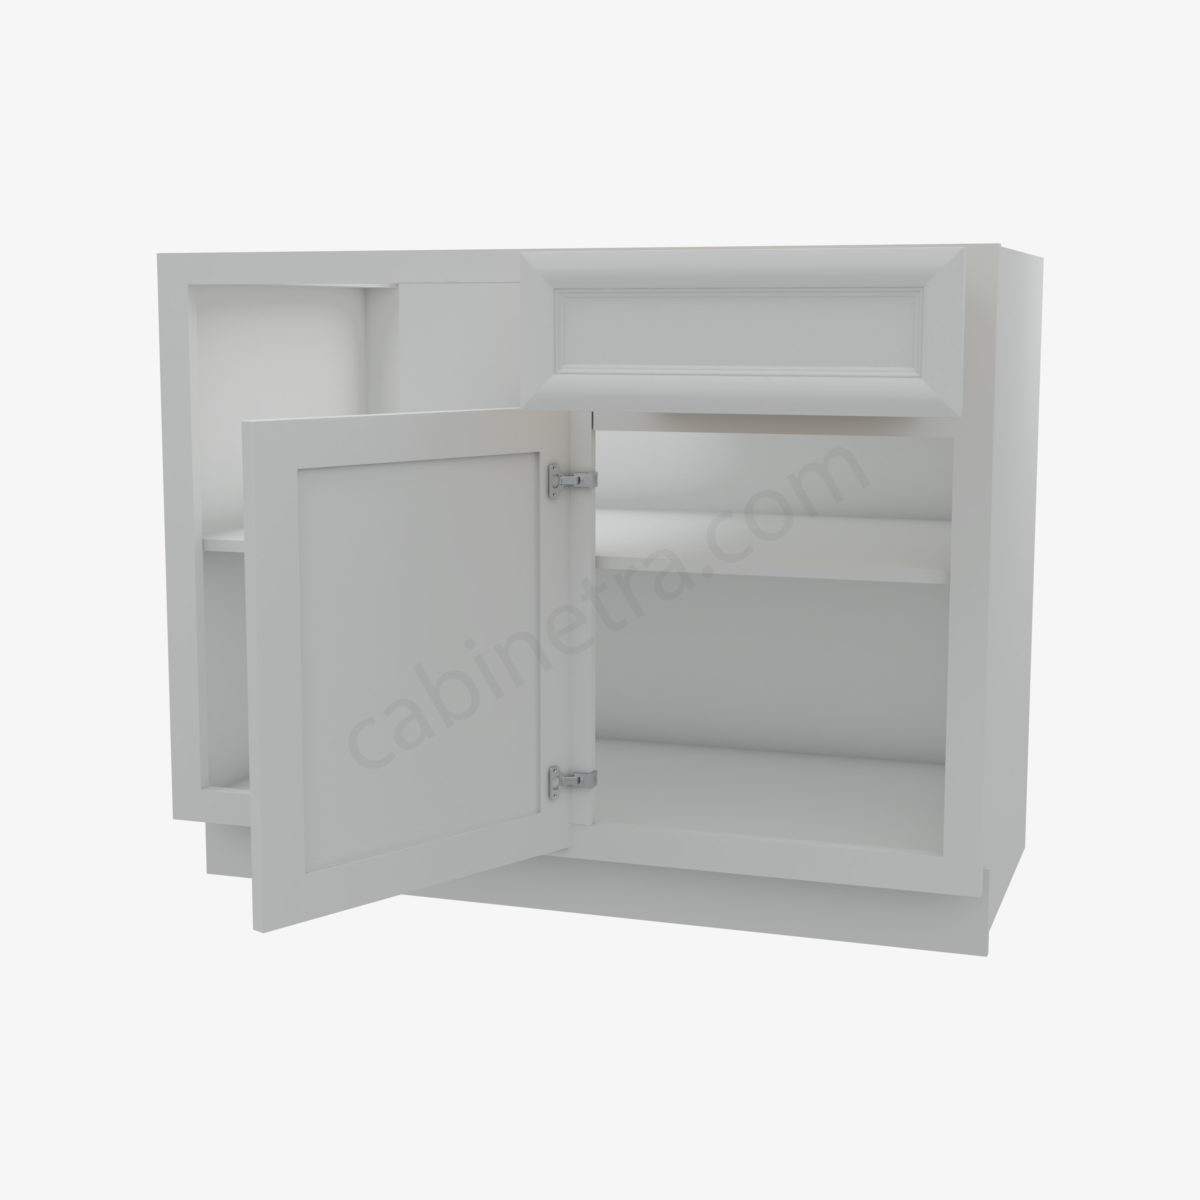 KW BBLC45 48 42W 5  Forevermark K White Cabinetra scaled